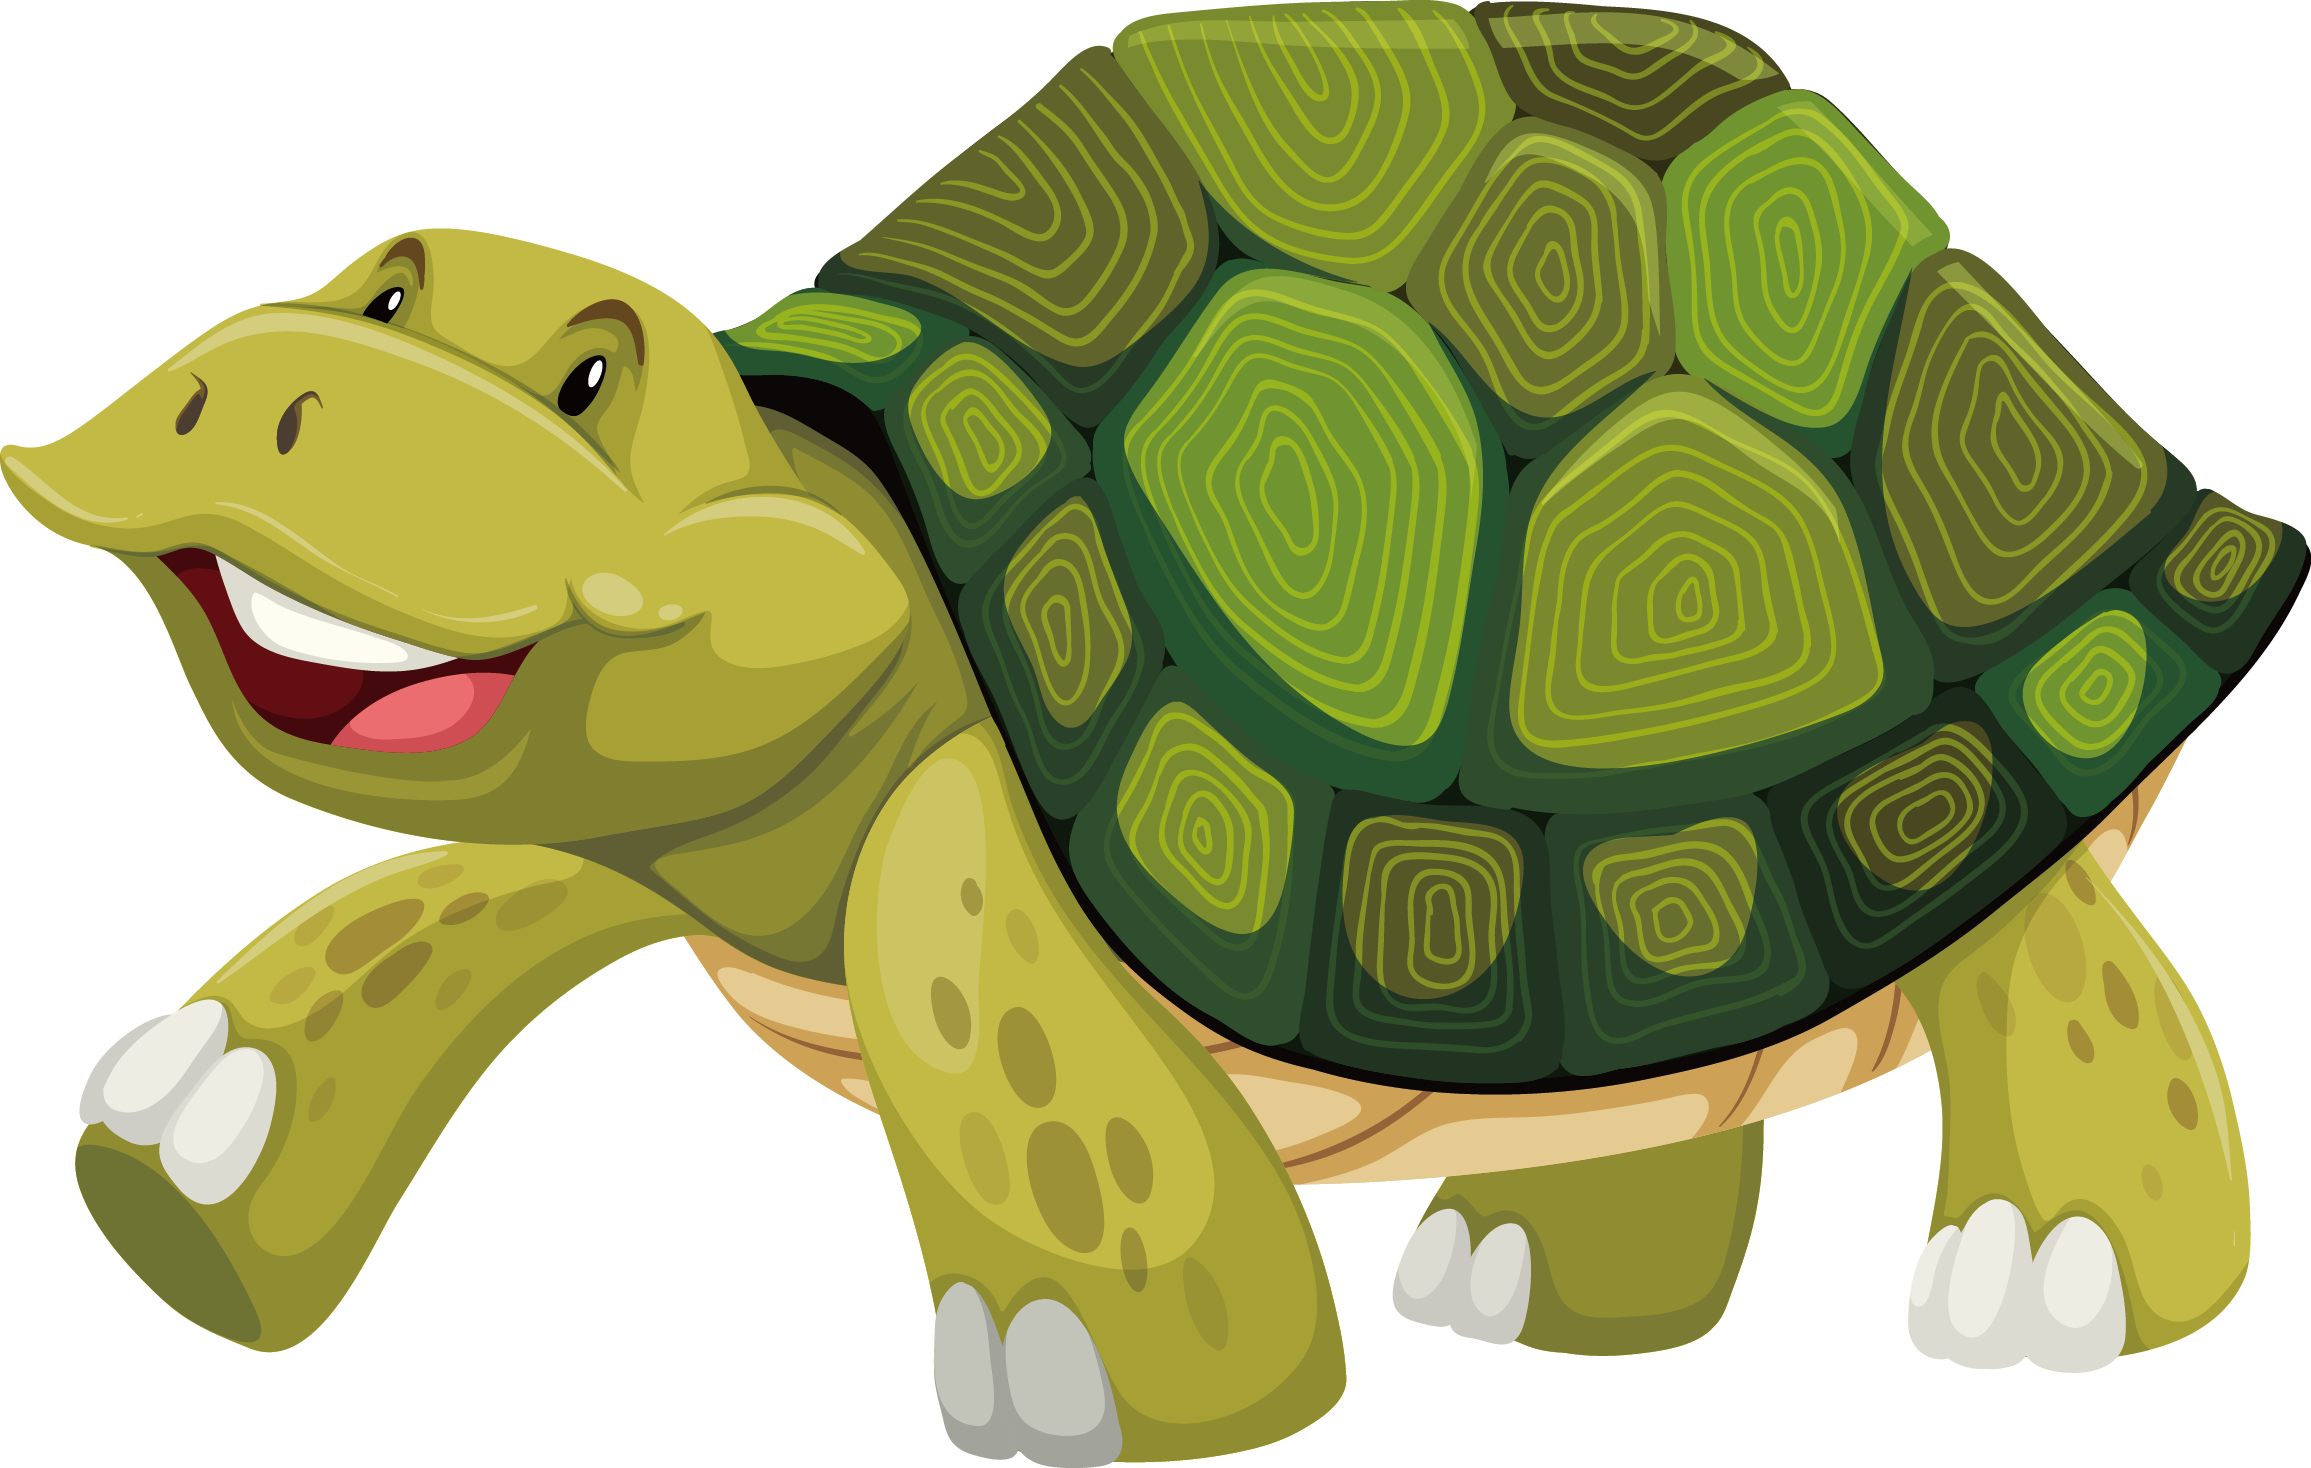 Turtle Shell Stock Photography Illustration Turtle Shell Cartoon 2311x1468 Png Clipart Download